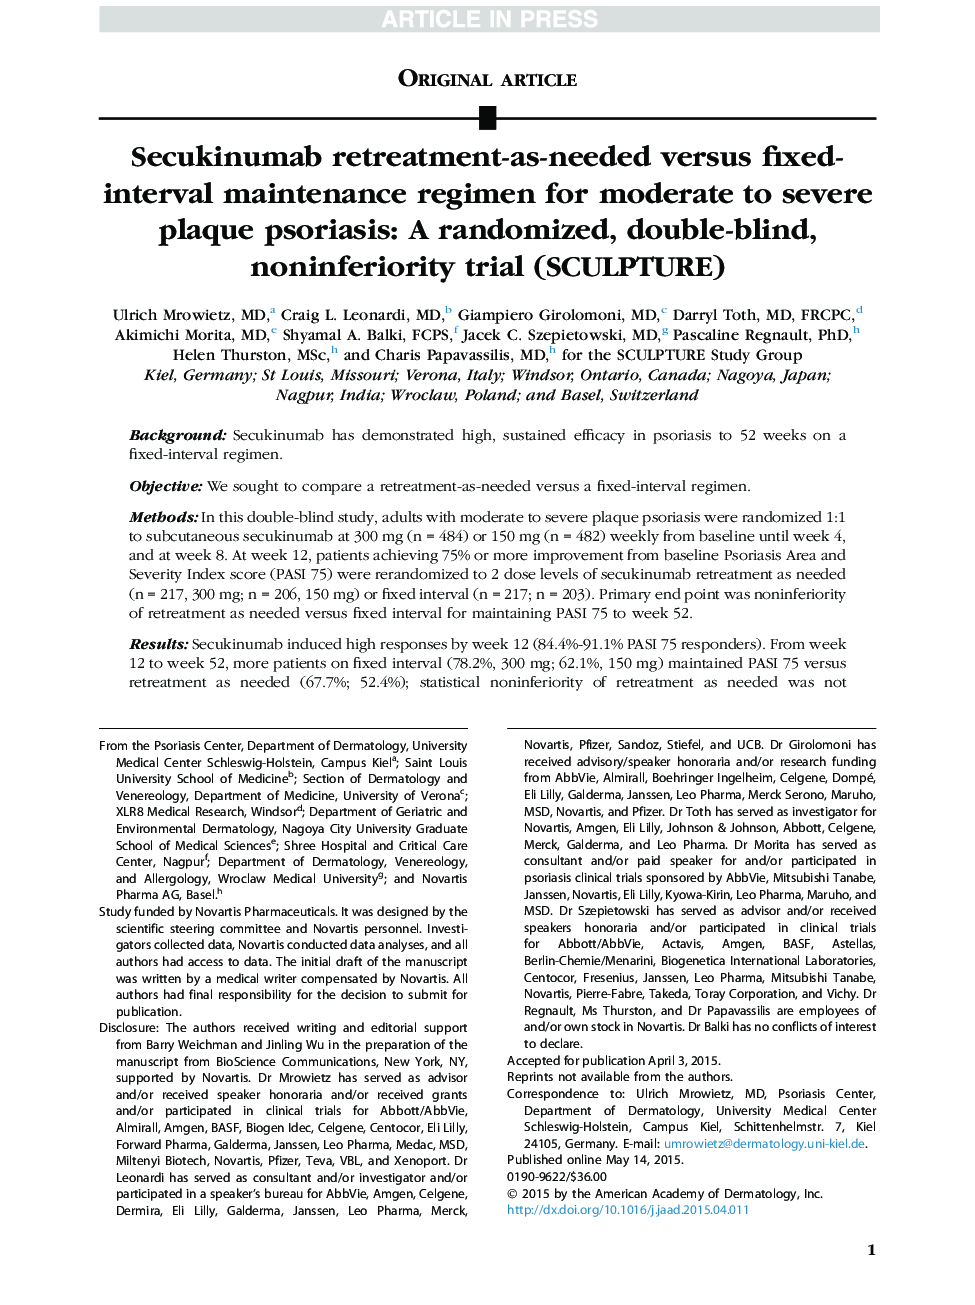 Secukinumab retreatment-as-needed versus fixed-interval maintenance regimen for moderate to severe plaque psoriasis: A randomized, double-blind, noninferiority trial (SCULPTURE)